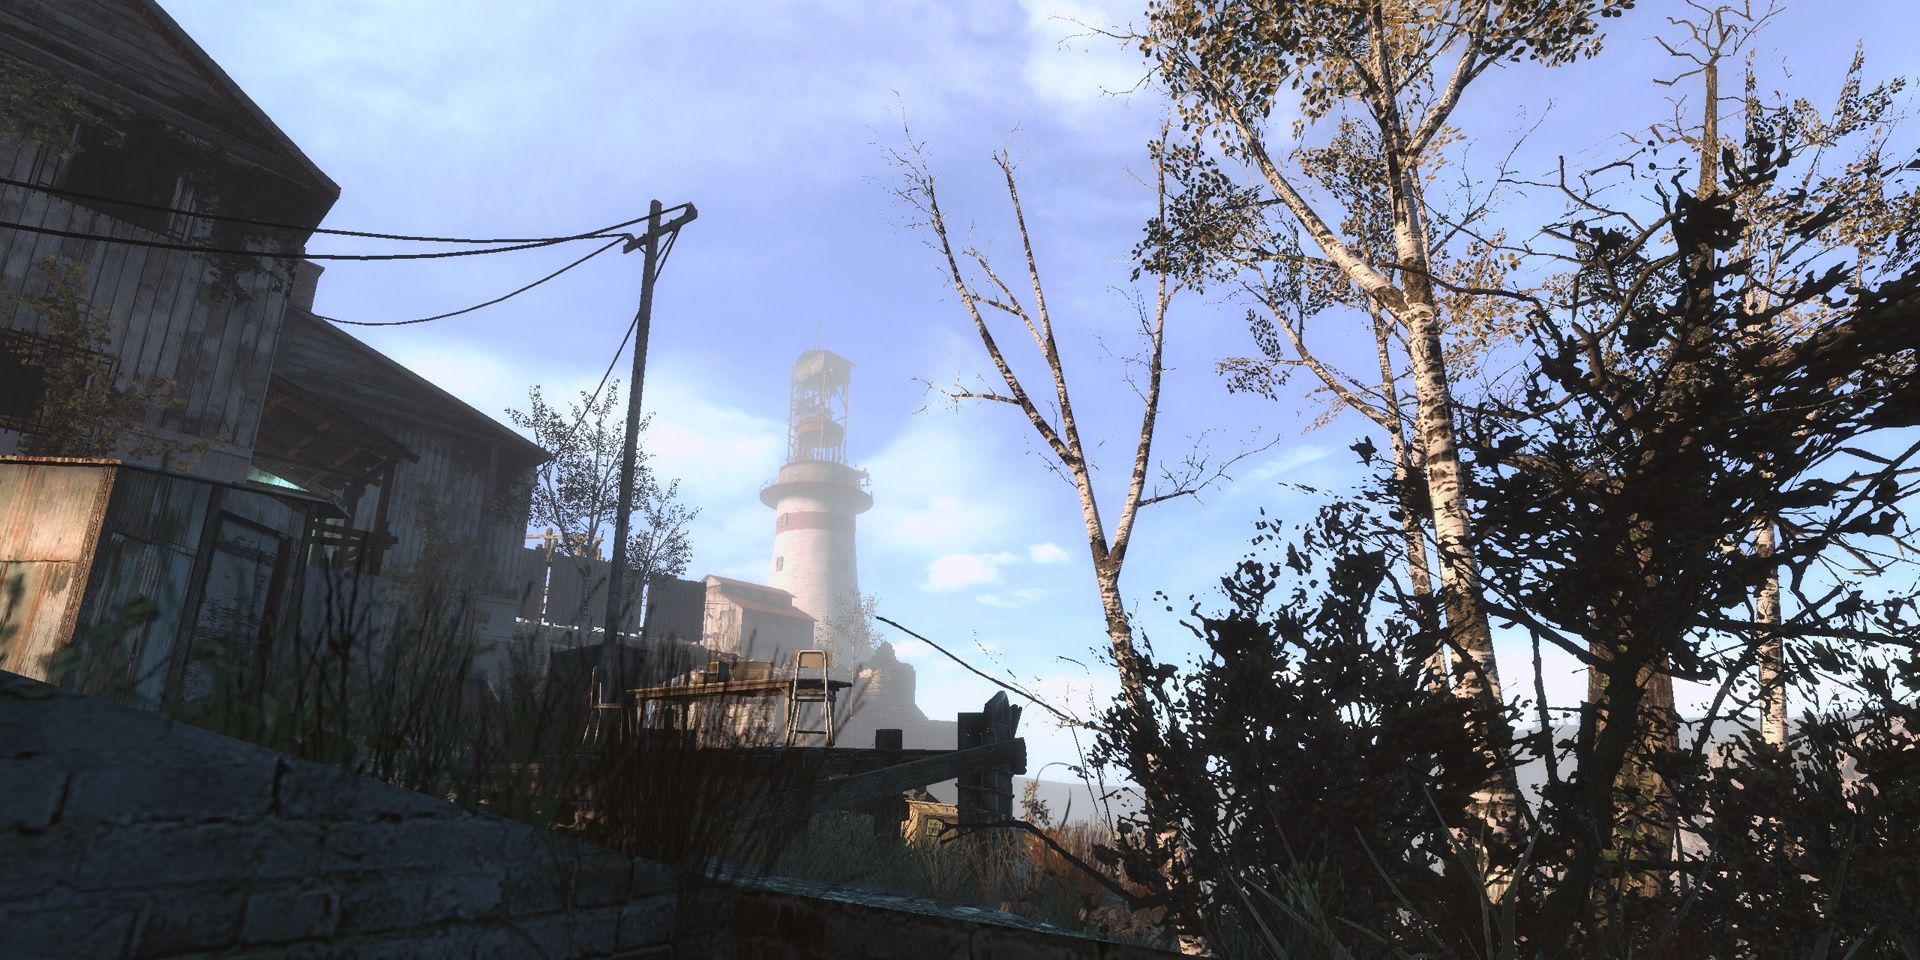 A far shot of the Resistance listening tower in Mission Improbable Half Life 2 Mod